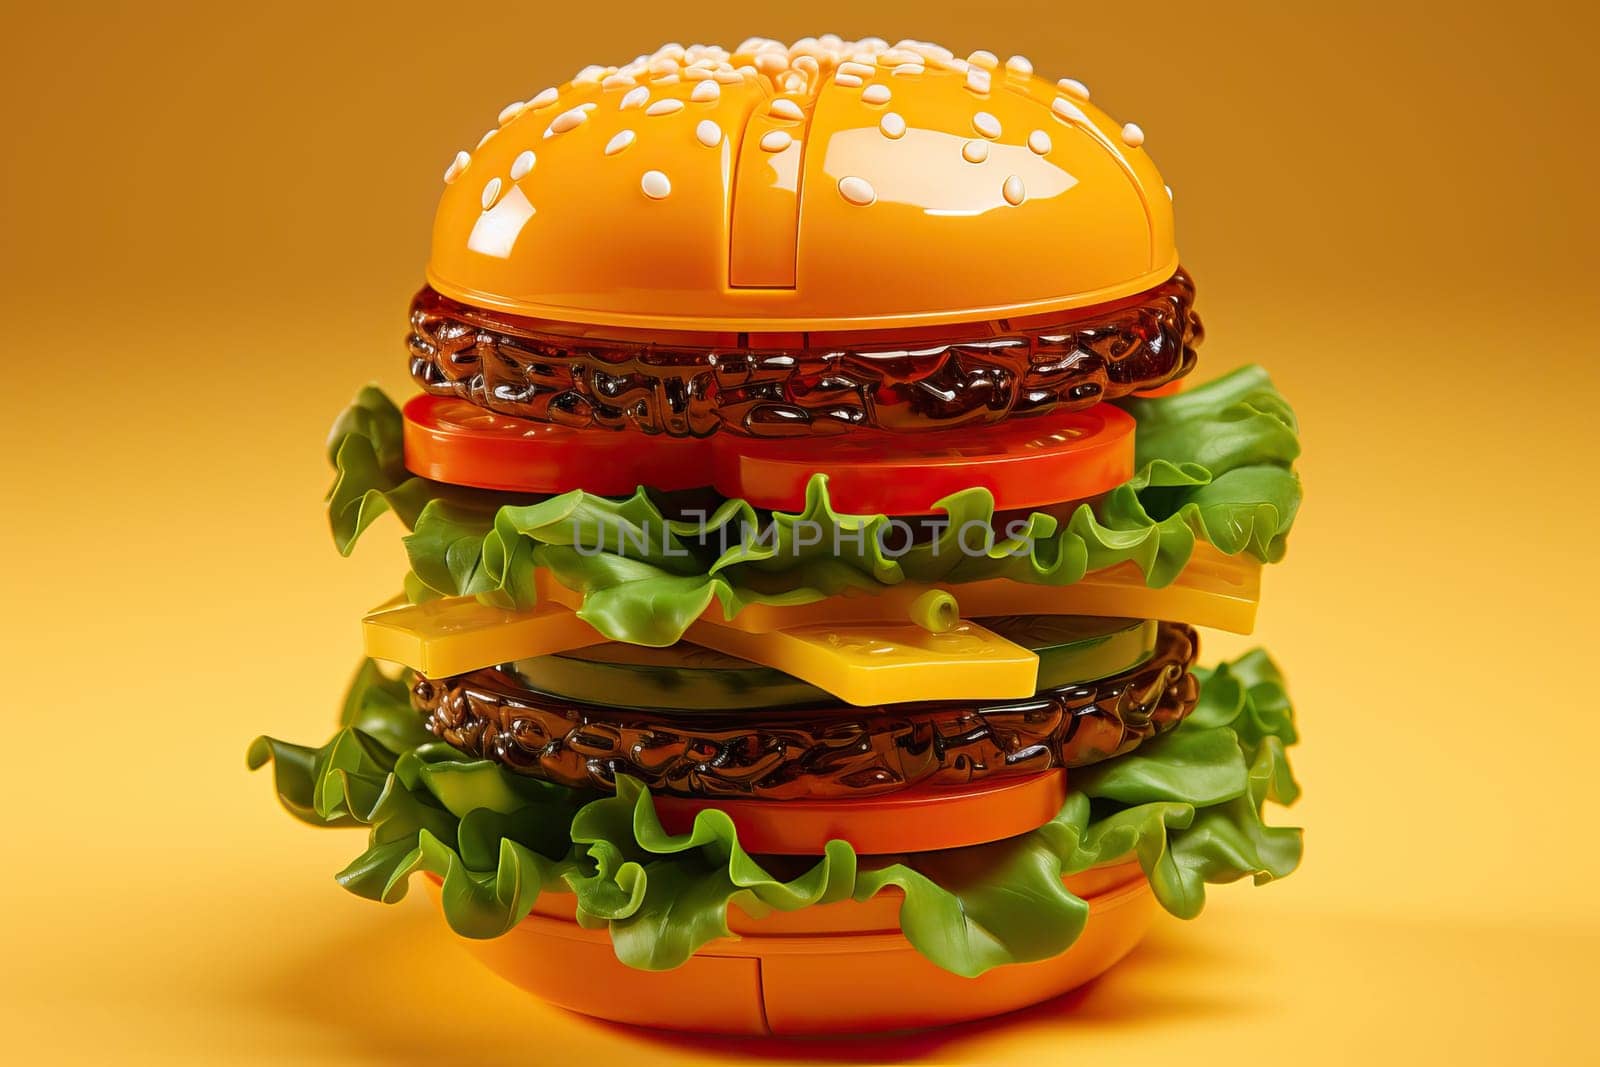 Plastic burger, salad, tomato, on a yellow background. Vertical orientation. Children's toy. The concept of harmful artificial food. Plastic Not organic.